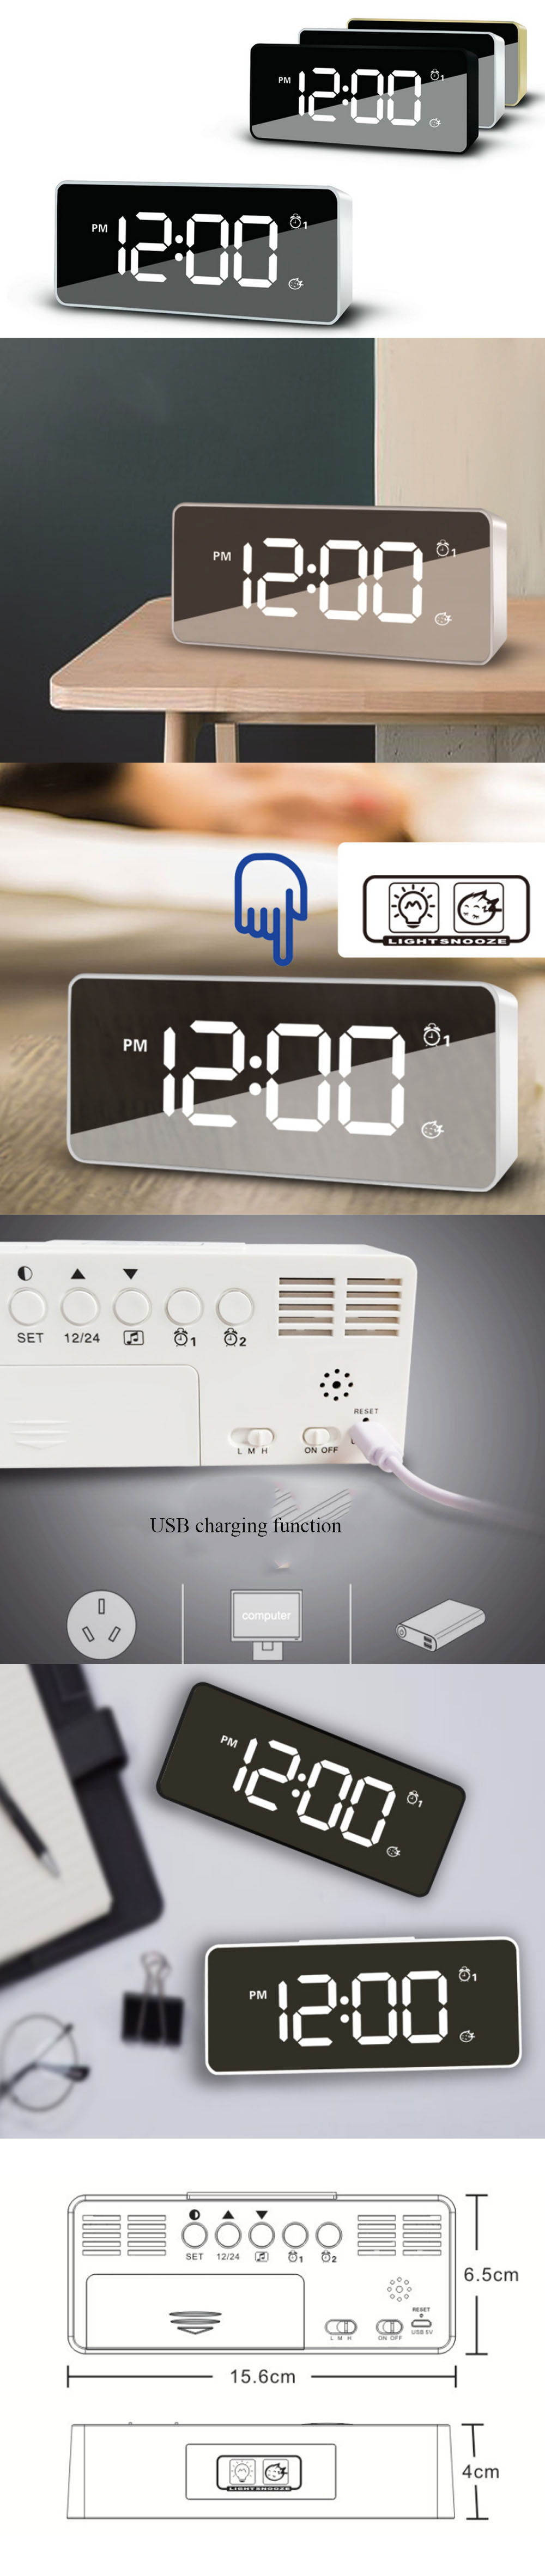 Chargable-LED-1224H-Alarm-Clock-Multifunction-Backlight-Adjustment-with-Dual-Alarm-Settings-Snooze-A-1618505-1